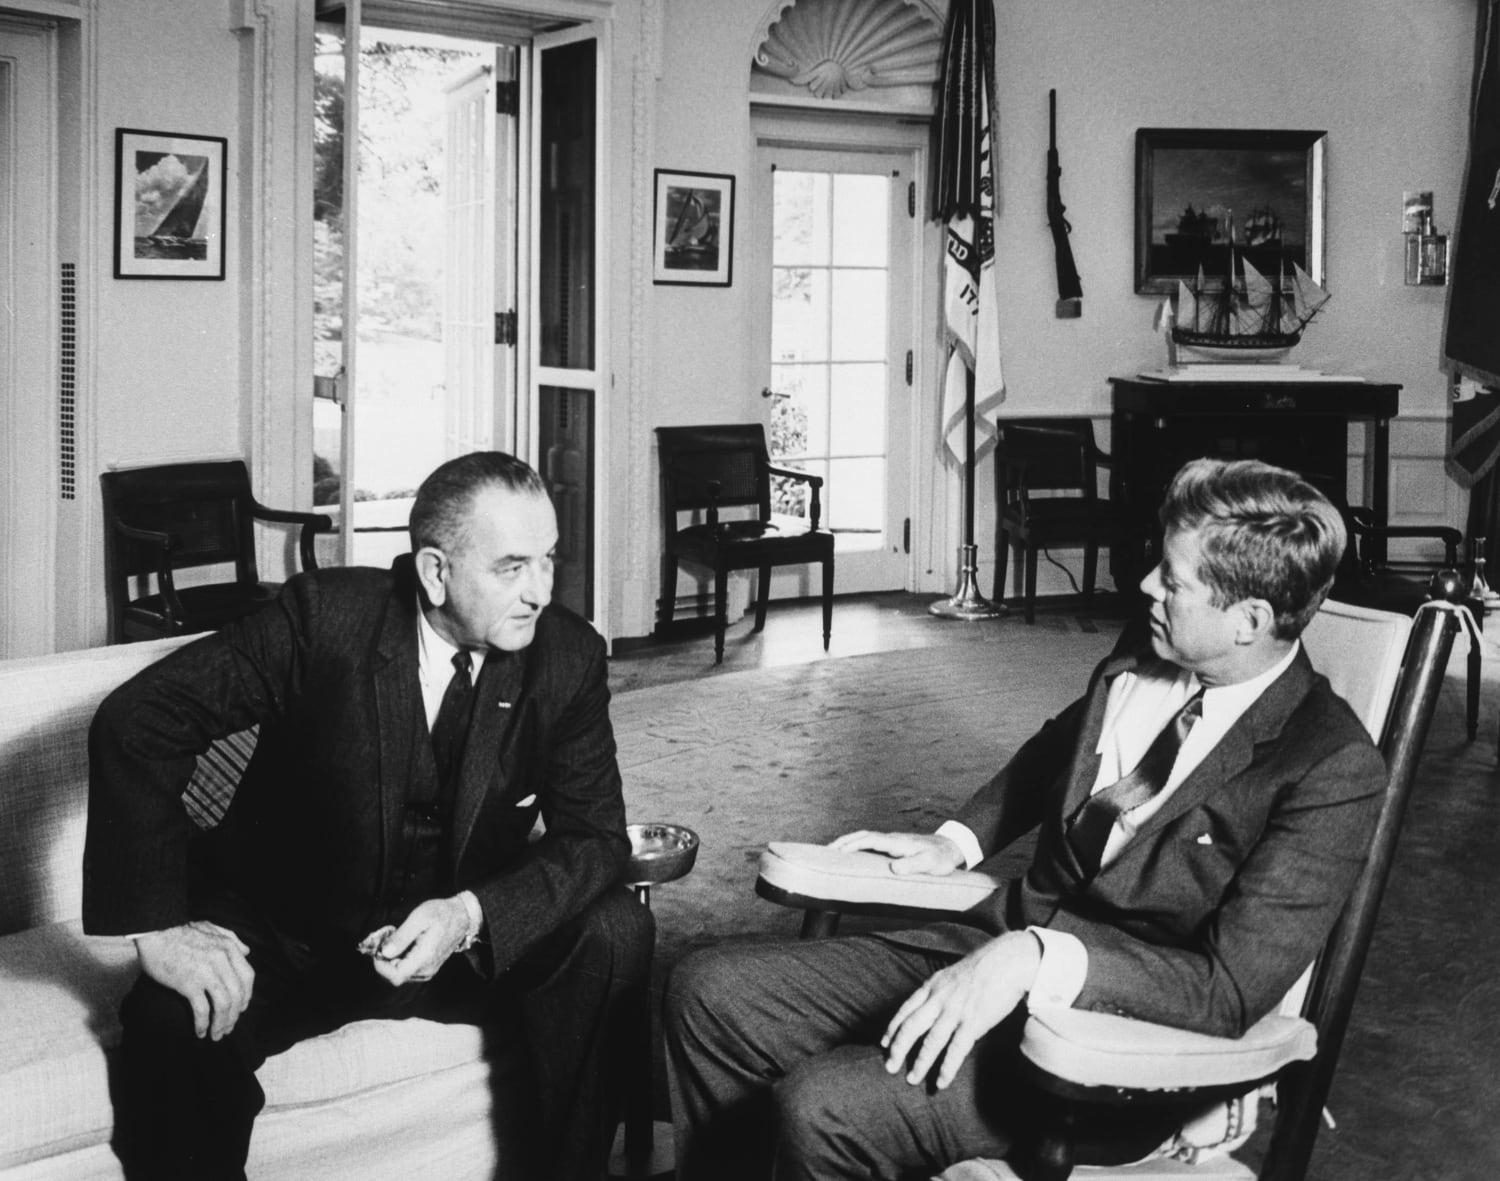 Vice President Lyndon B. Johnson visits President John F. Kennedy in the Oval Office, Sept. 17, 1963. Just 10 weeks later, LBJ unexpectedly would become president.